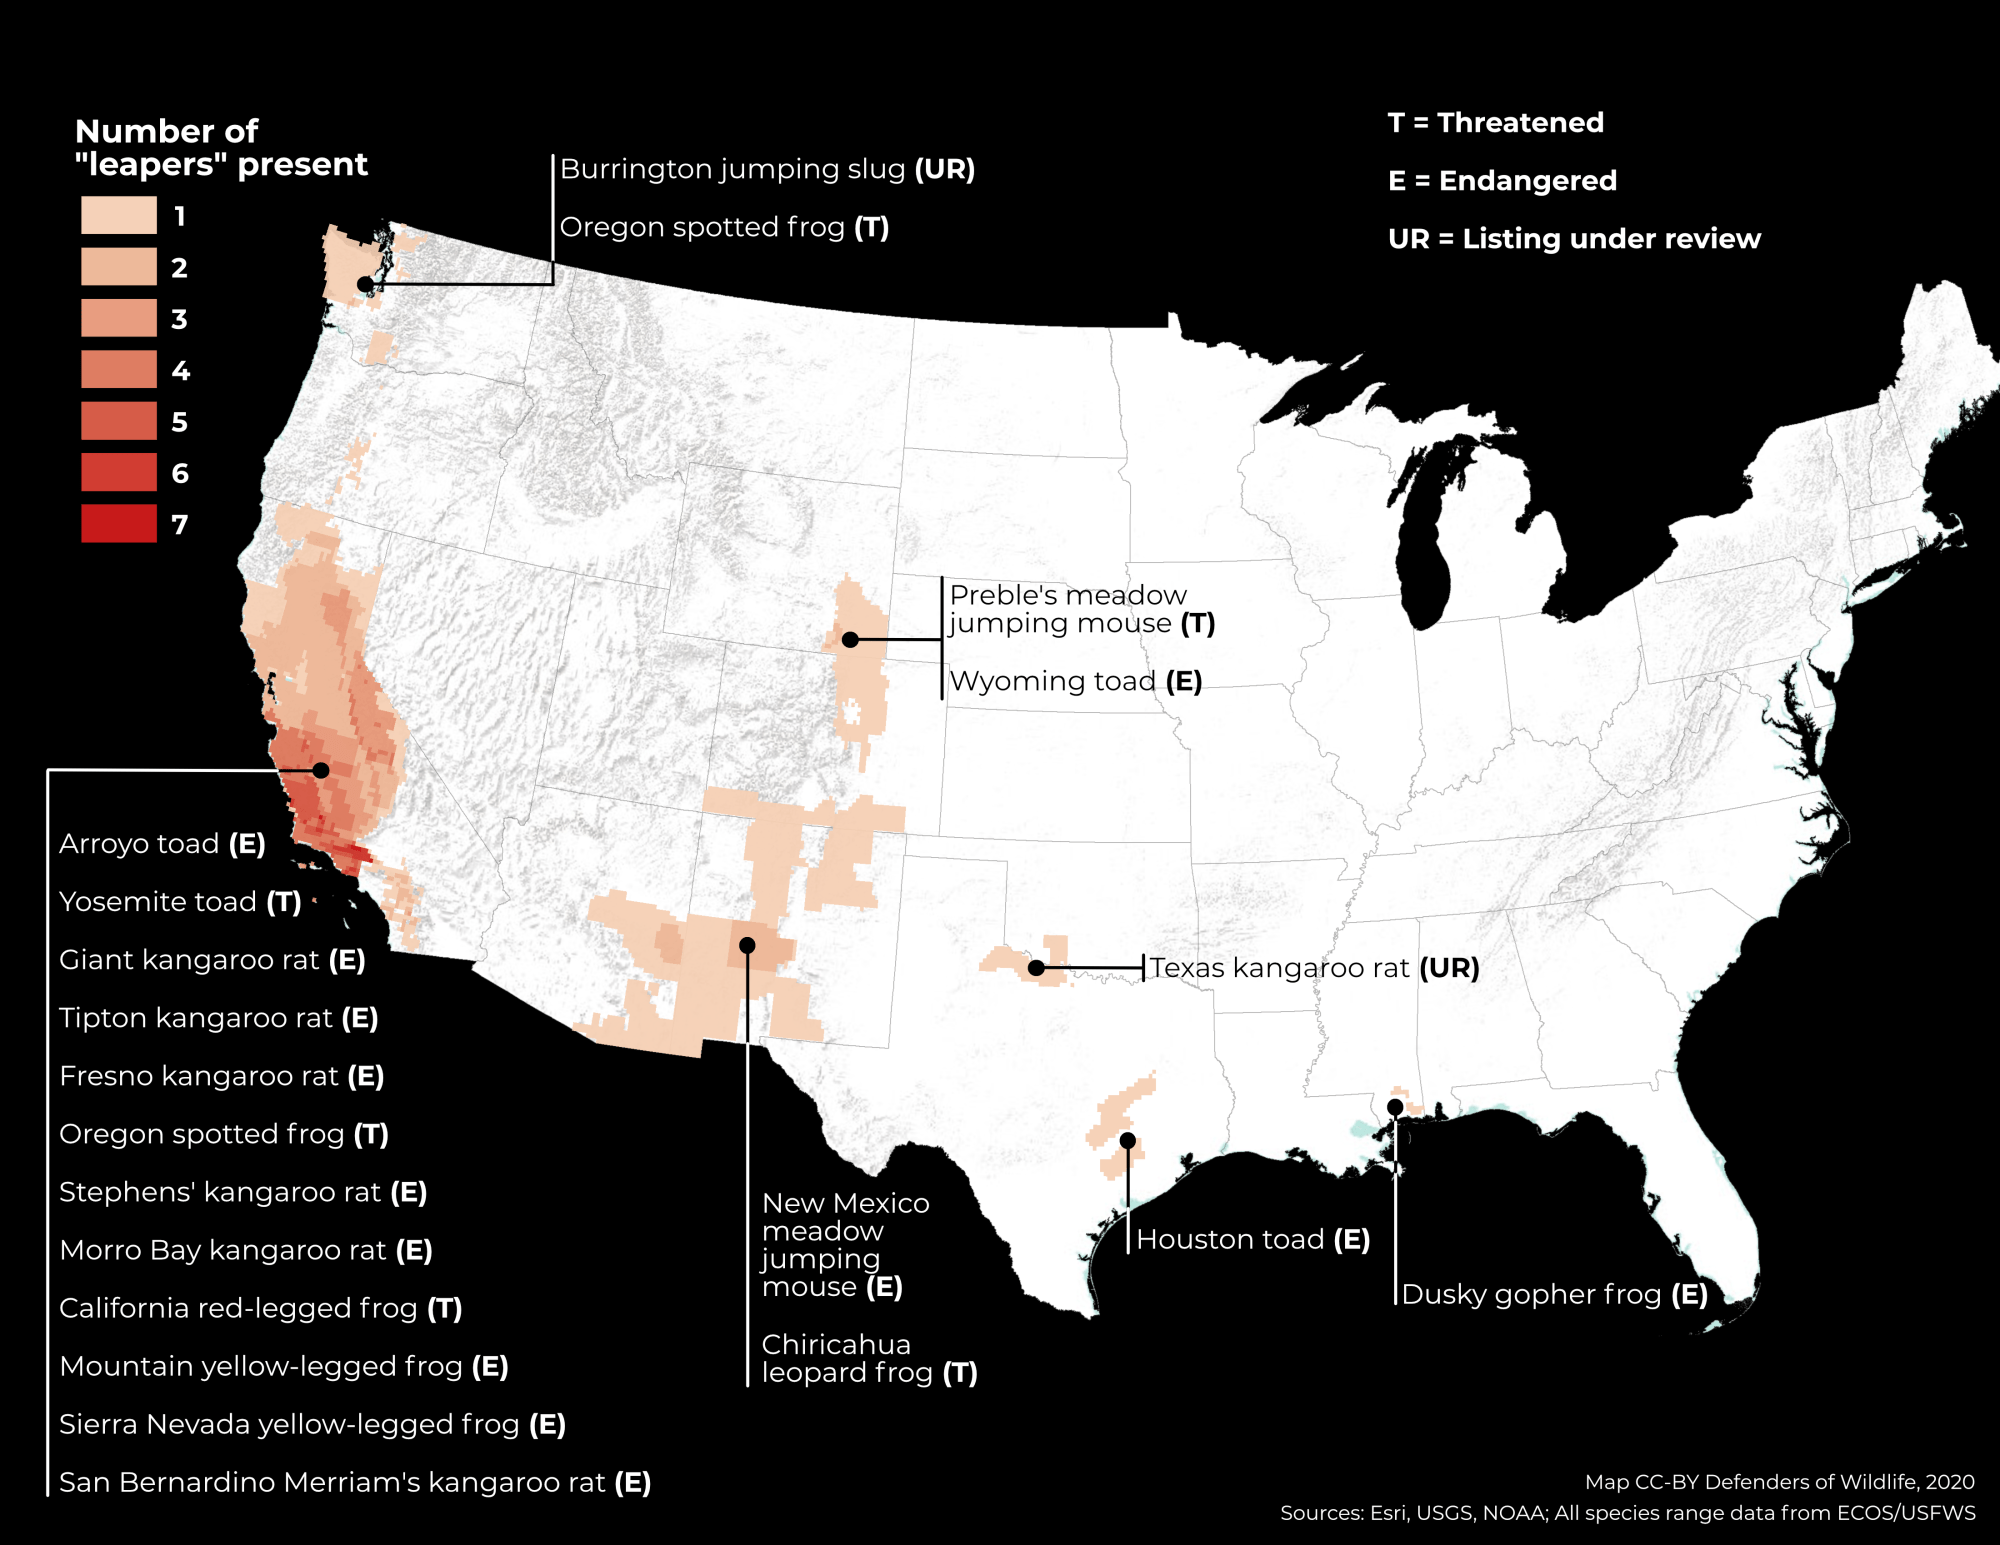 Map of listed leaper species